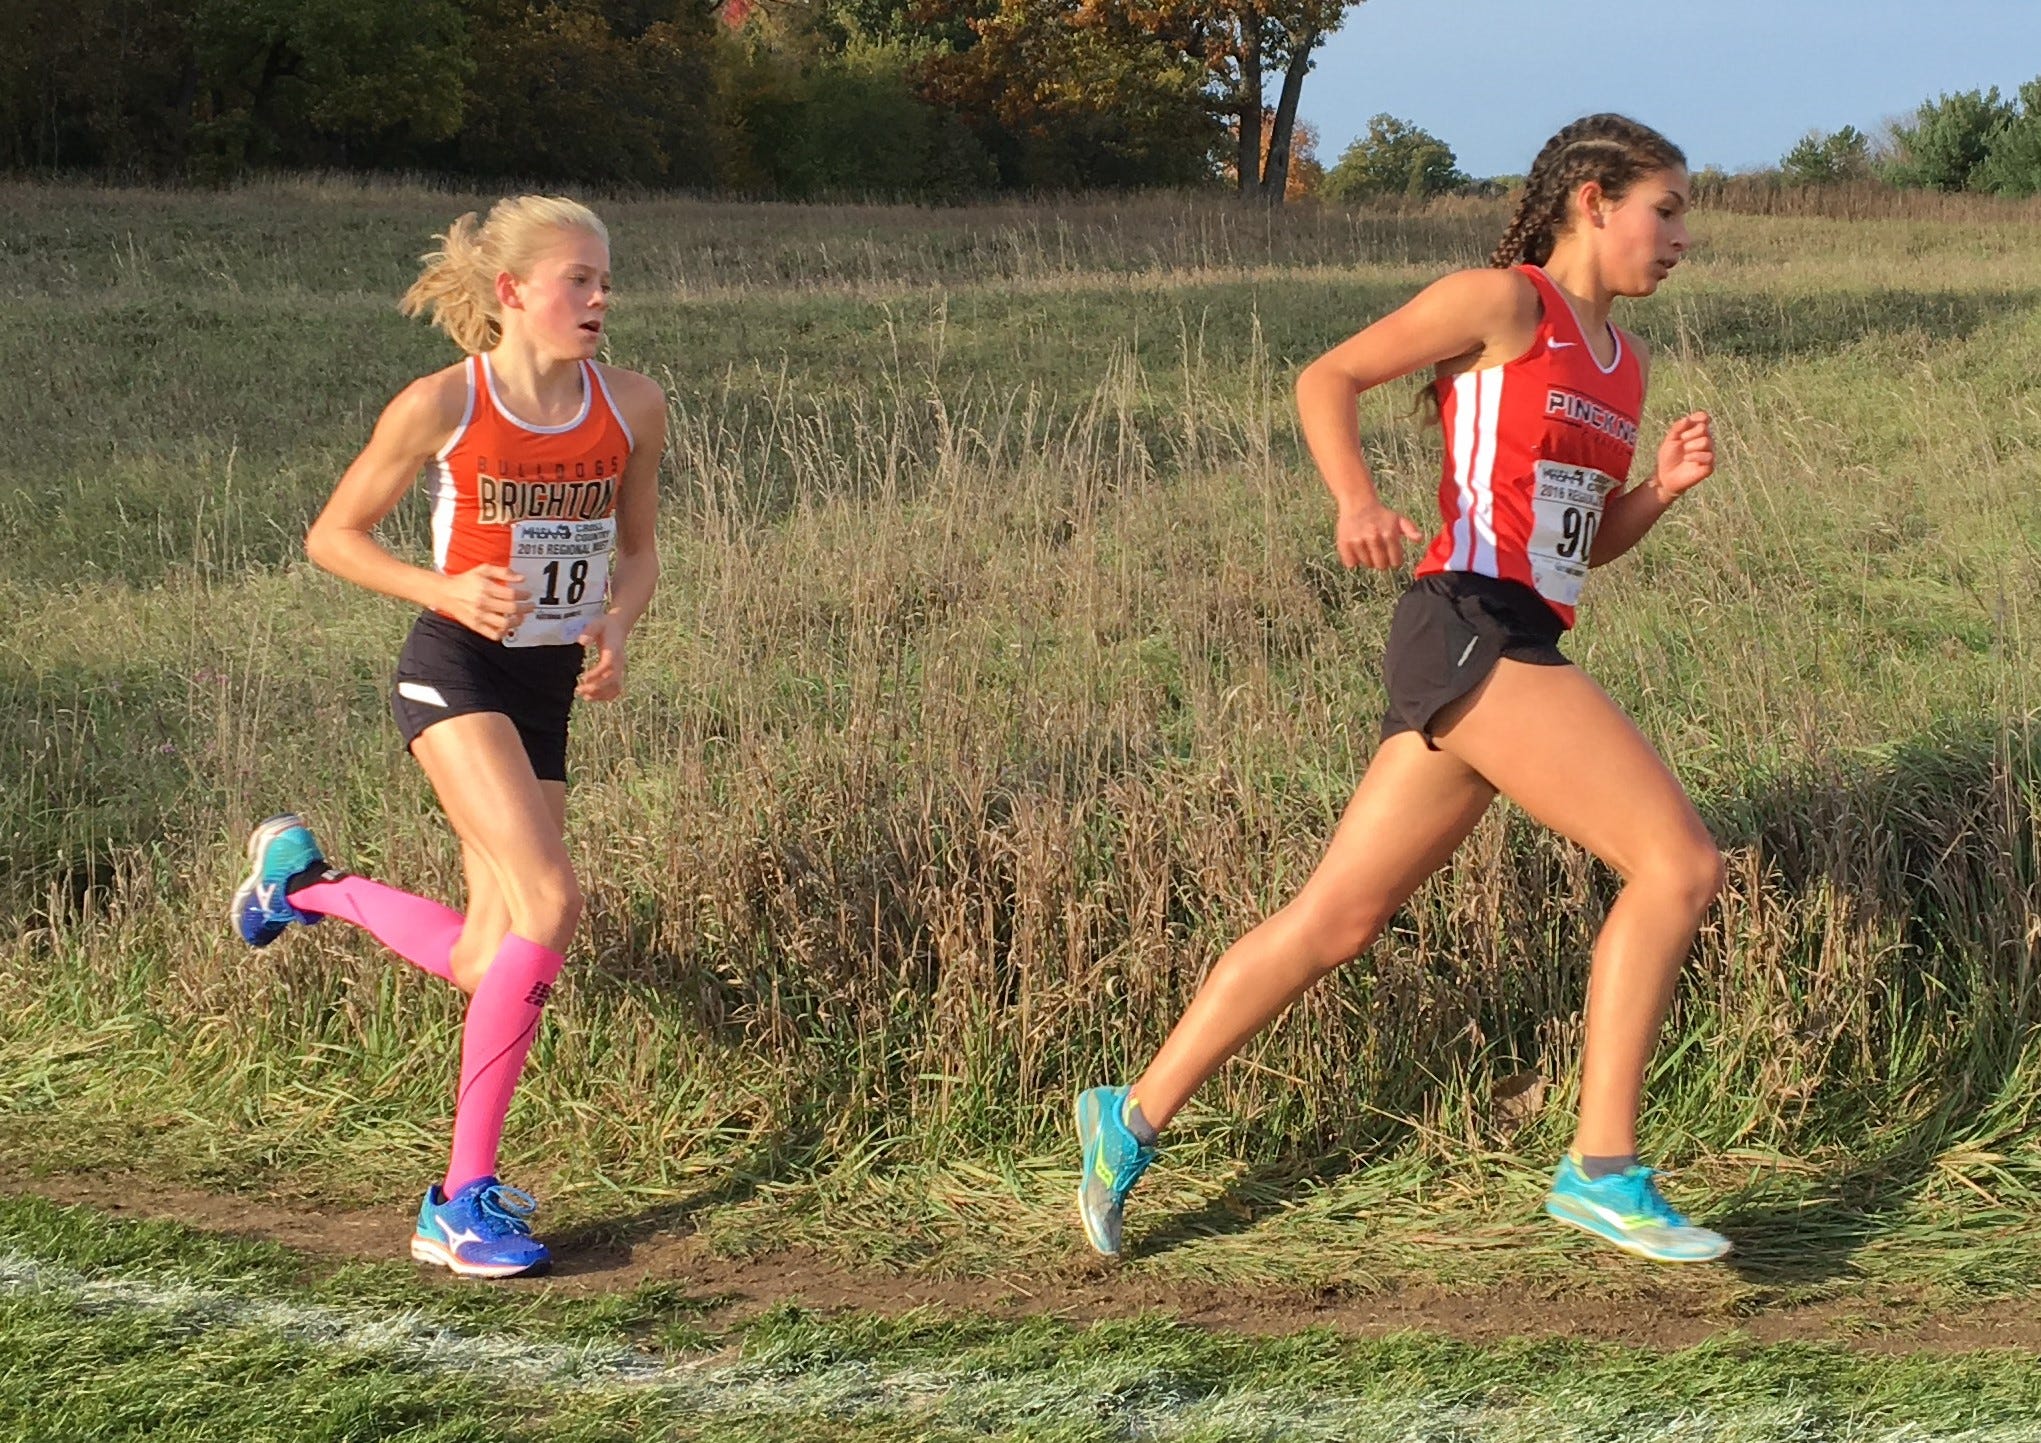 Top 5 girls cross country runners in 